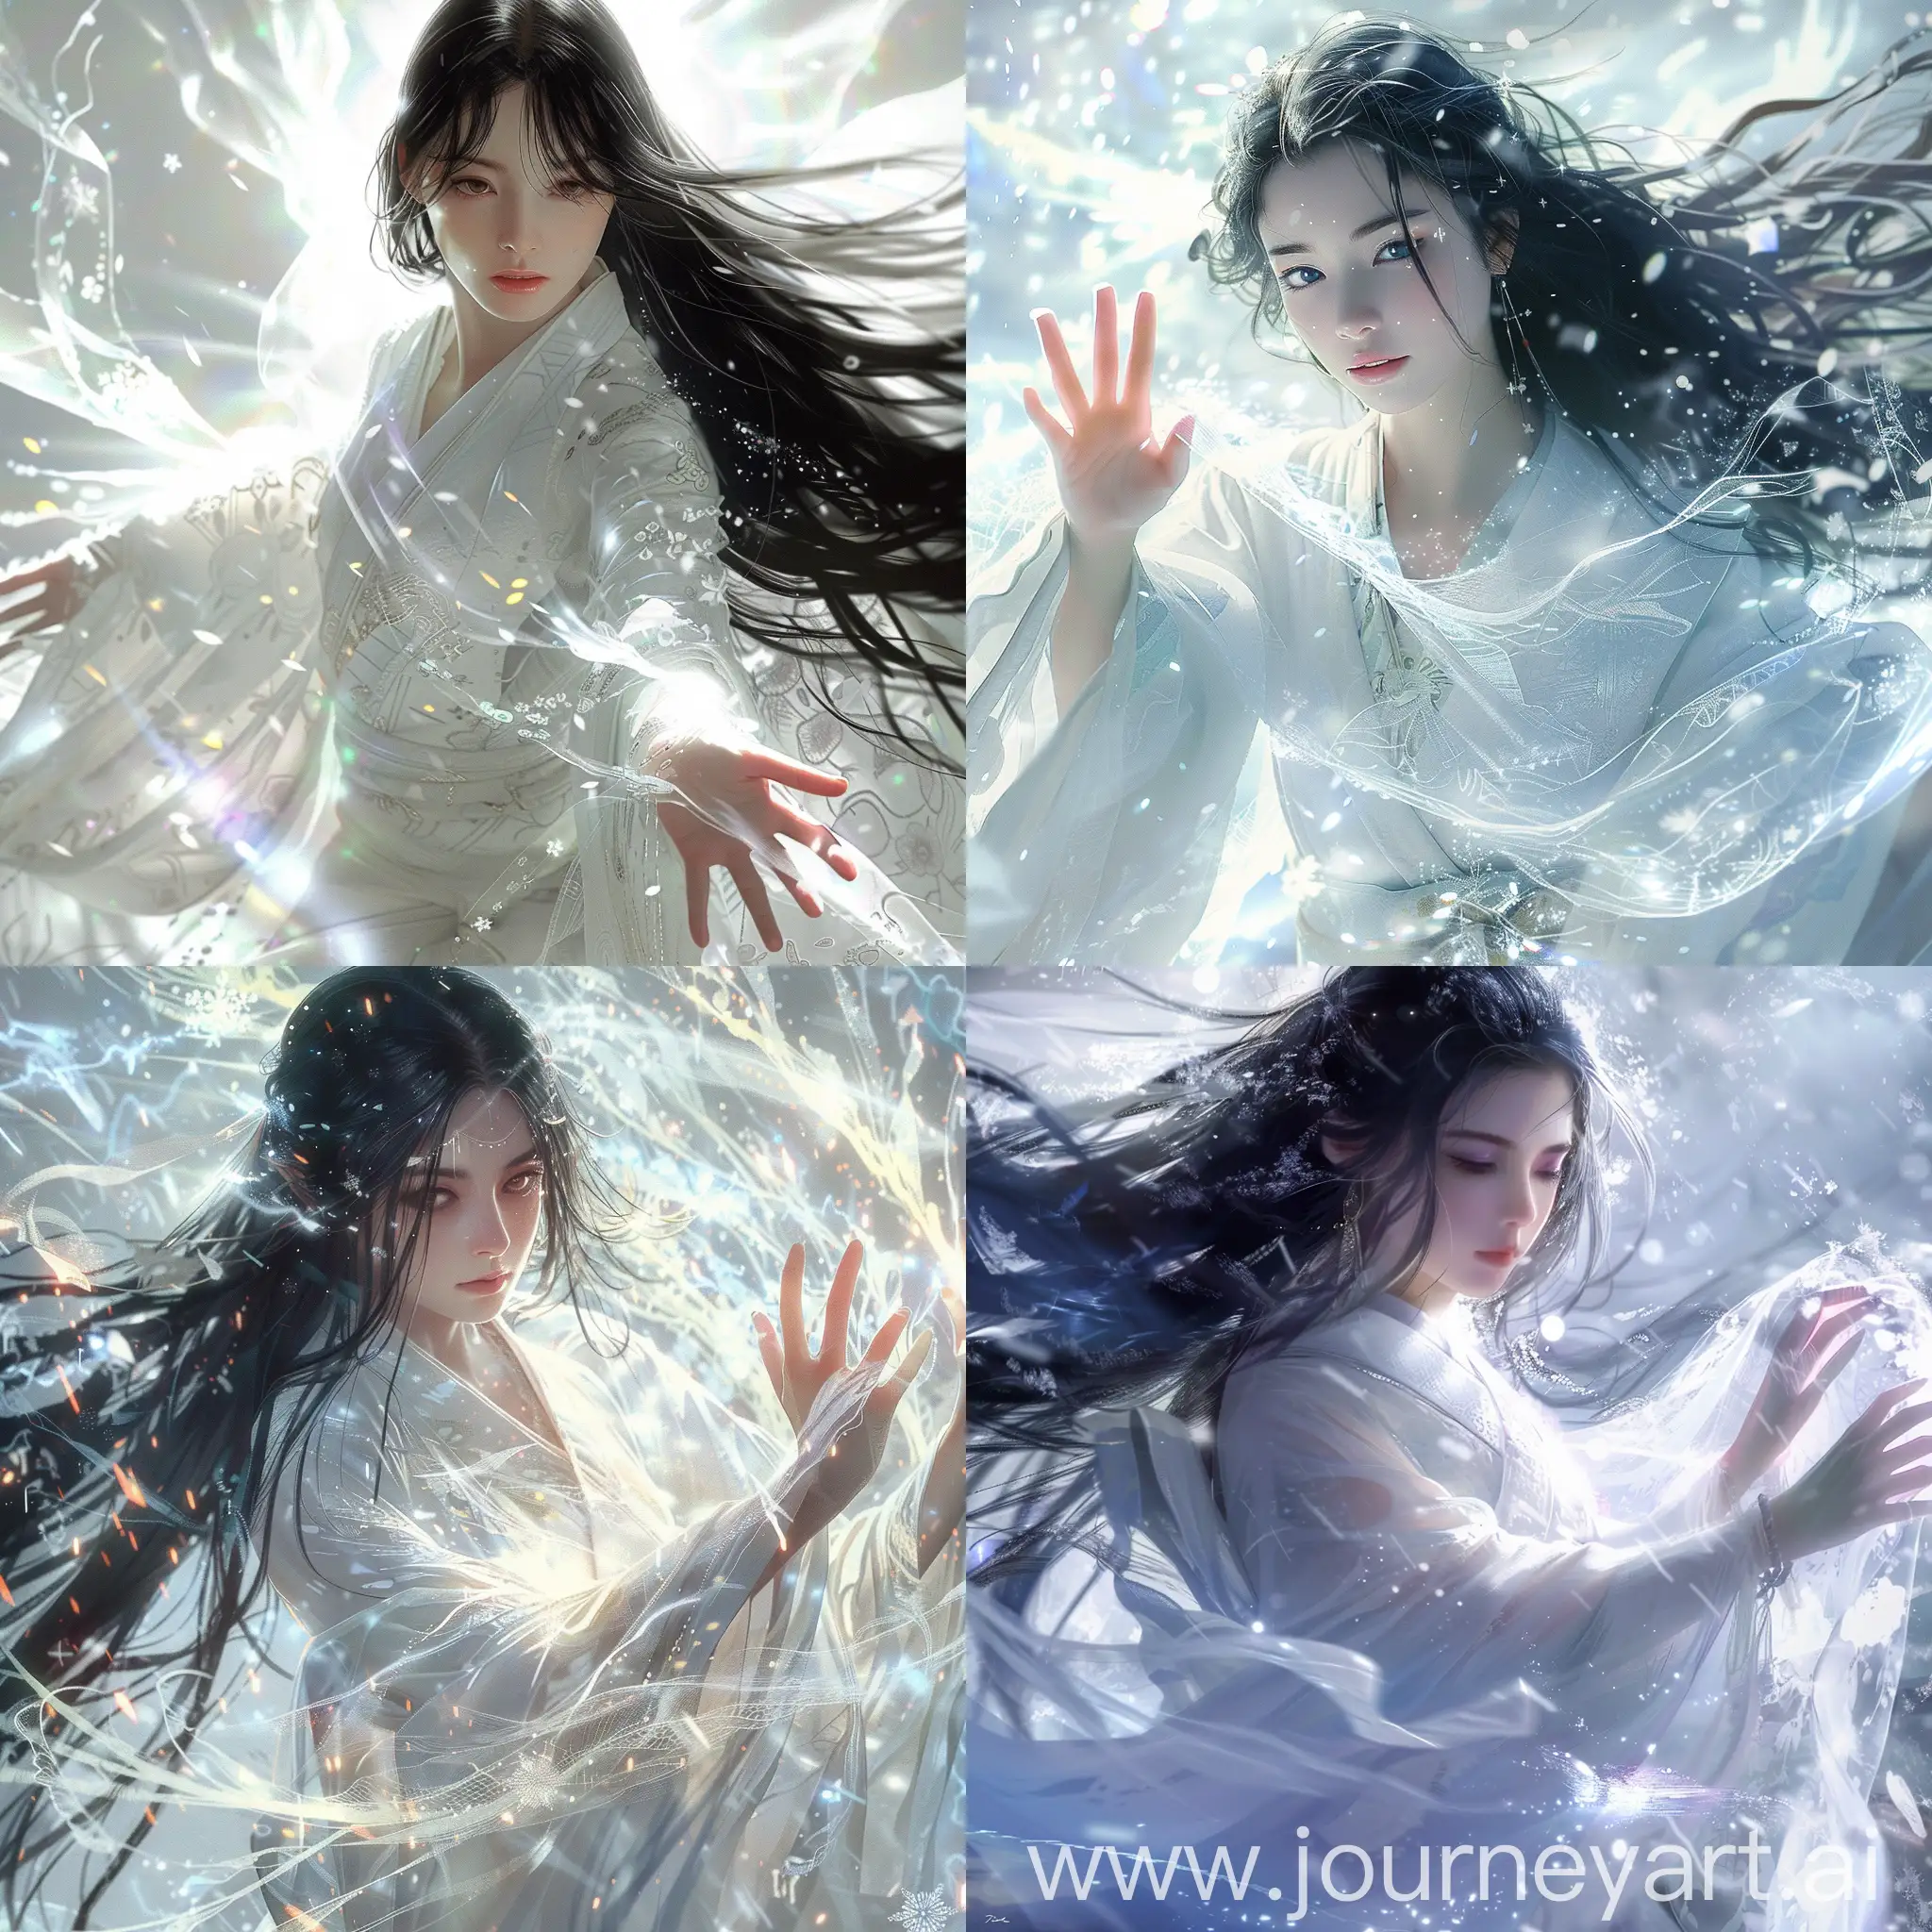 The winter spirit from Japanese mythology in the form of a beautiful woman, long black hair, white kimono, official art, cinematic light, (1girl:1.5), (nice hands), beautiful and aesthetic, extremely detailed, dynamic angle, elegant, vivid colours, romanticism, glowing, magical, enigmatic, mystical, intricate, vibrant color, transparent, fascinating, surreal, excellent, (Masterpiece:1. 5), (best quality:1. 5)